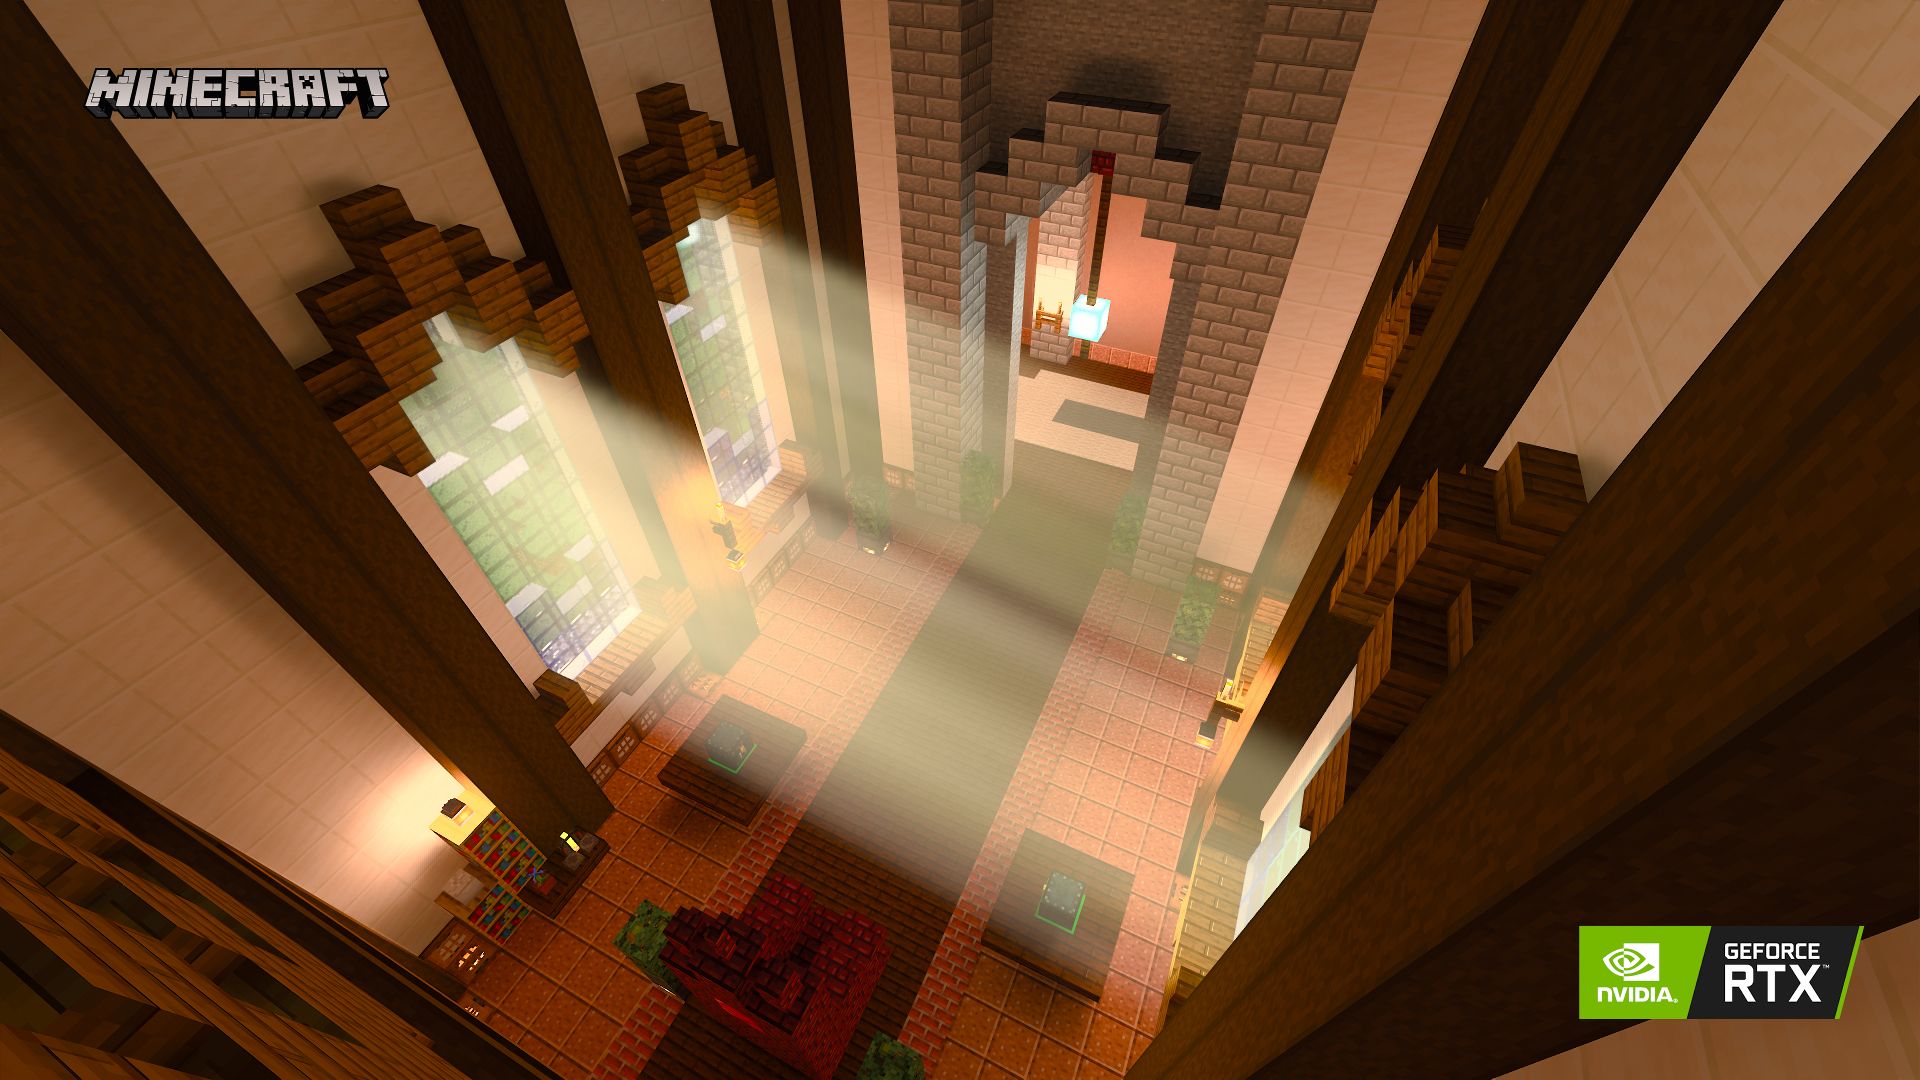 Minecraft RTX vs Minecraft: come see how much ray tracing really